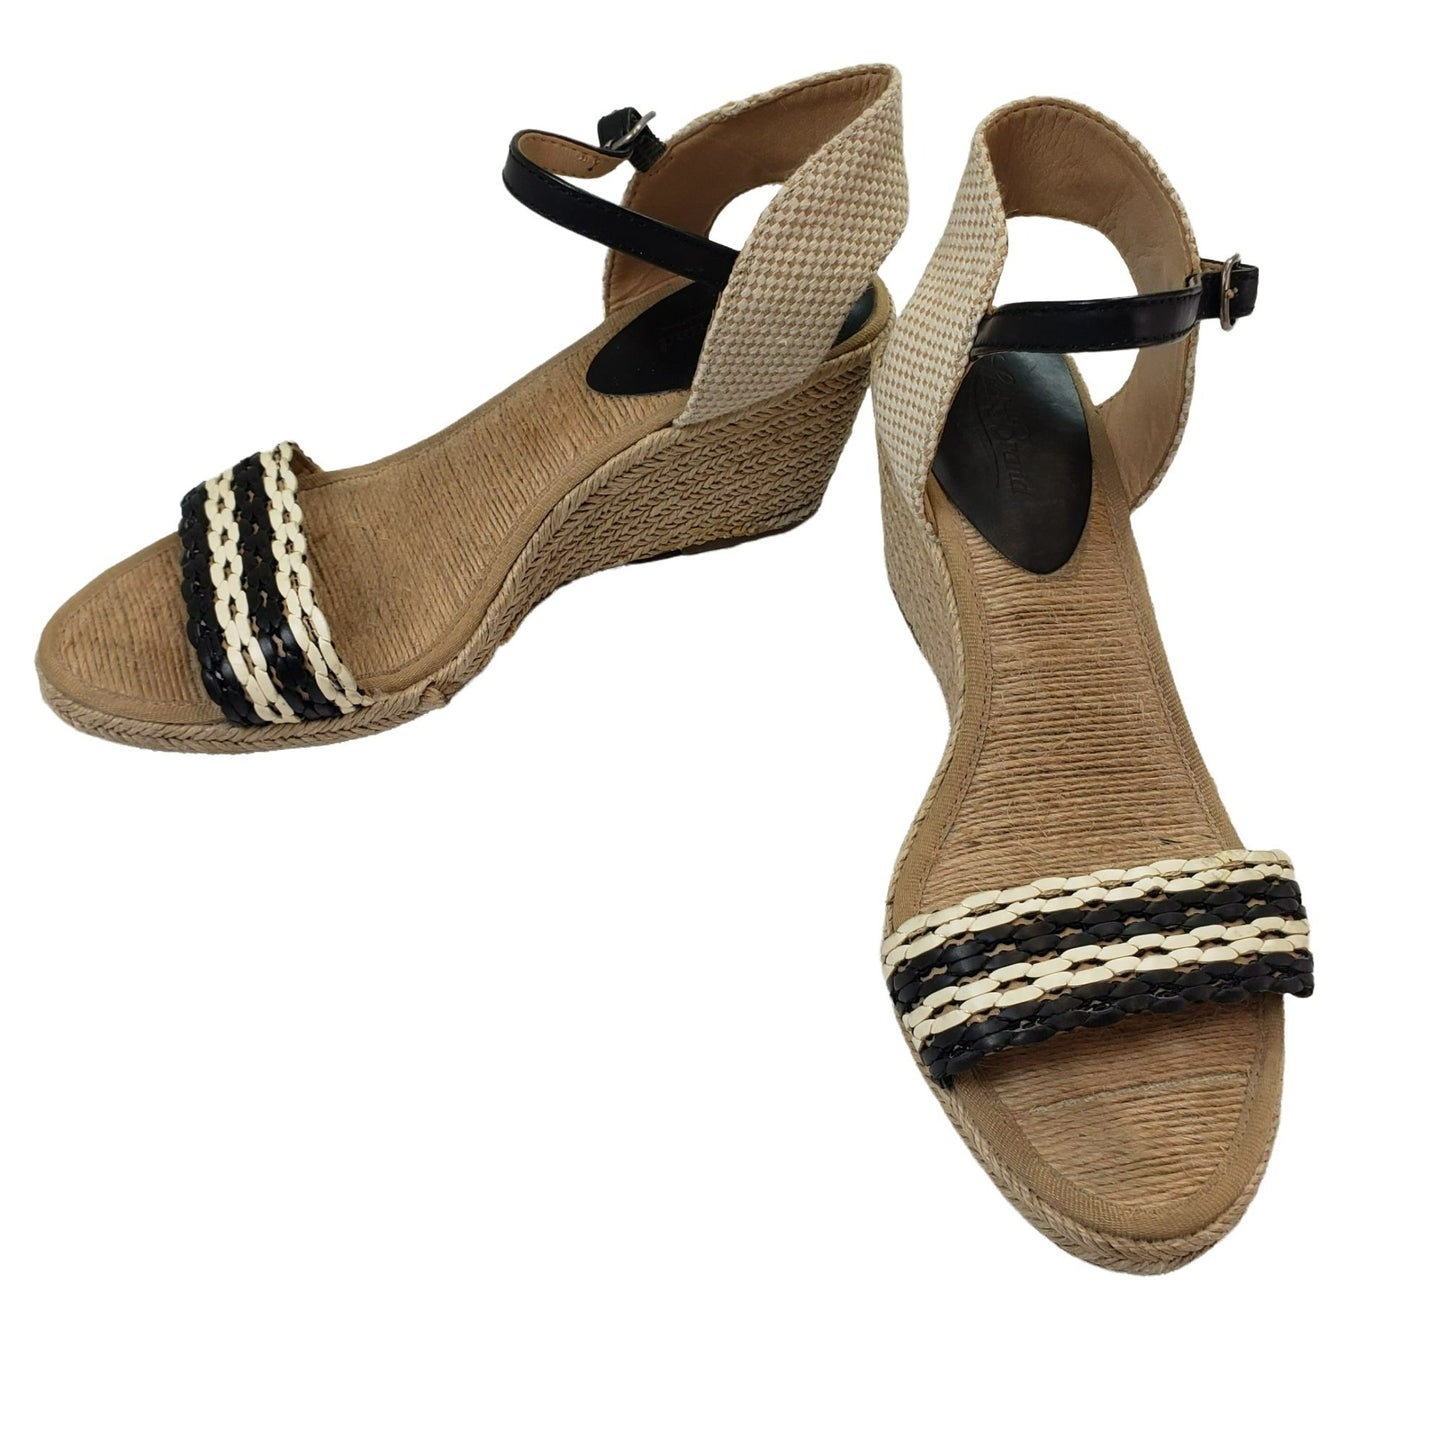 Lucky Brand Kavelli 2 Espadrille Wedge Sandals Size 8.5